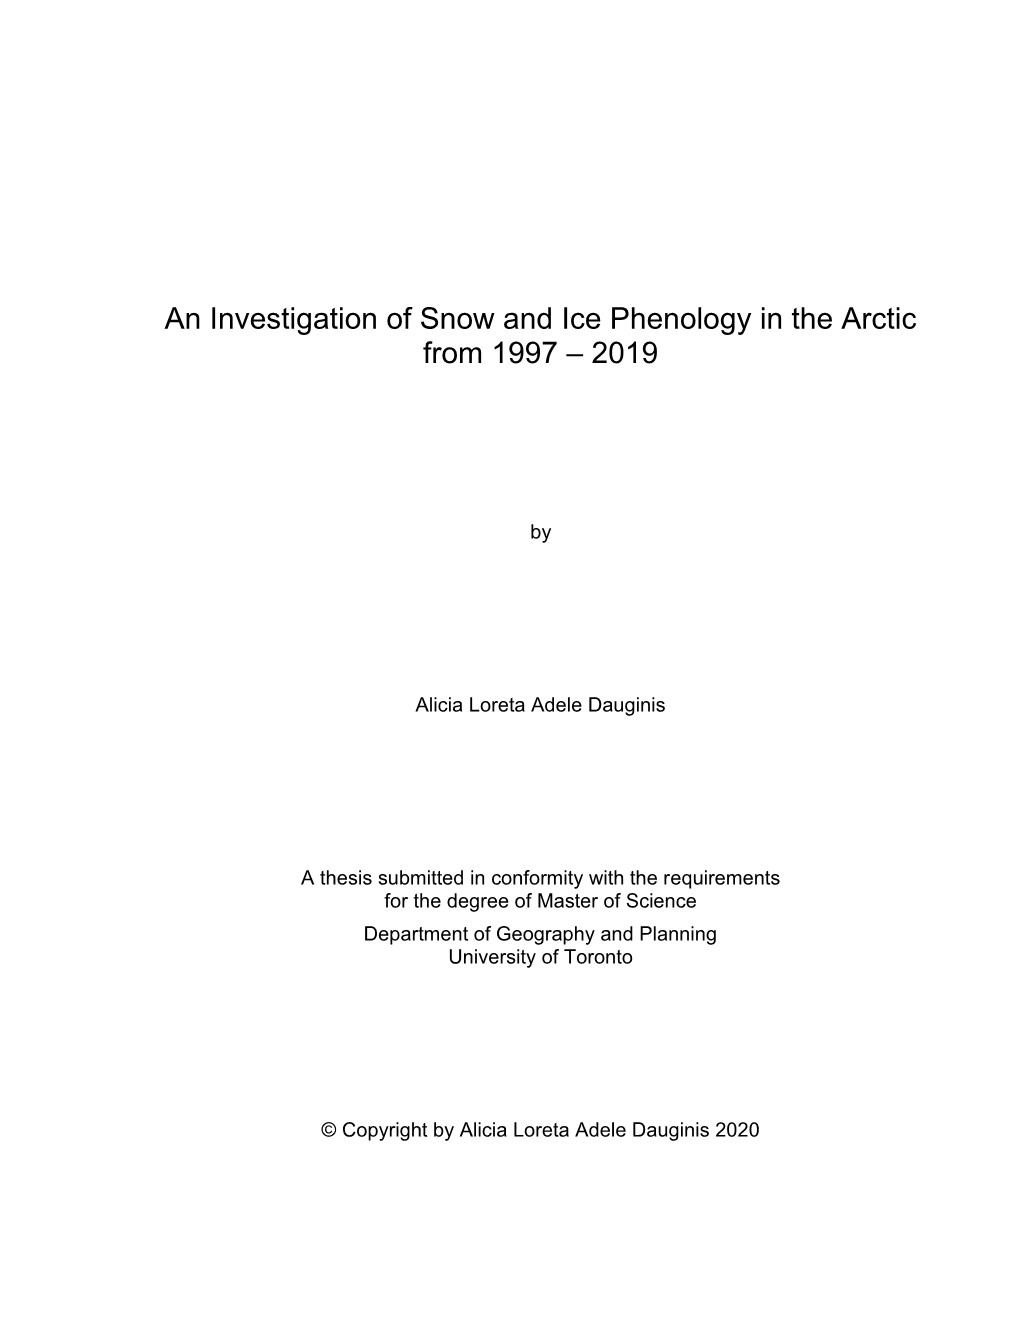 An Investigation of Snow and Ice Phenology in the Arctic from 1997 – 2019